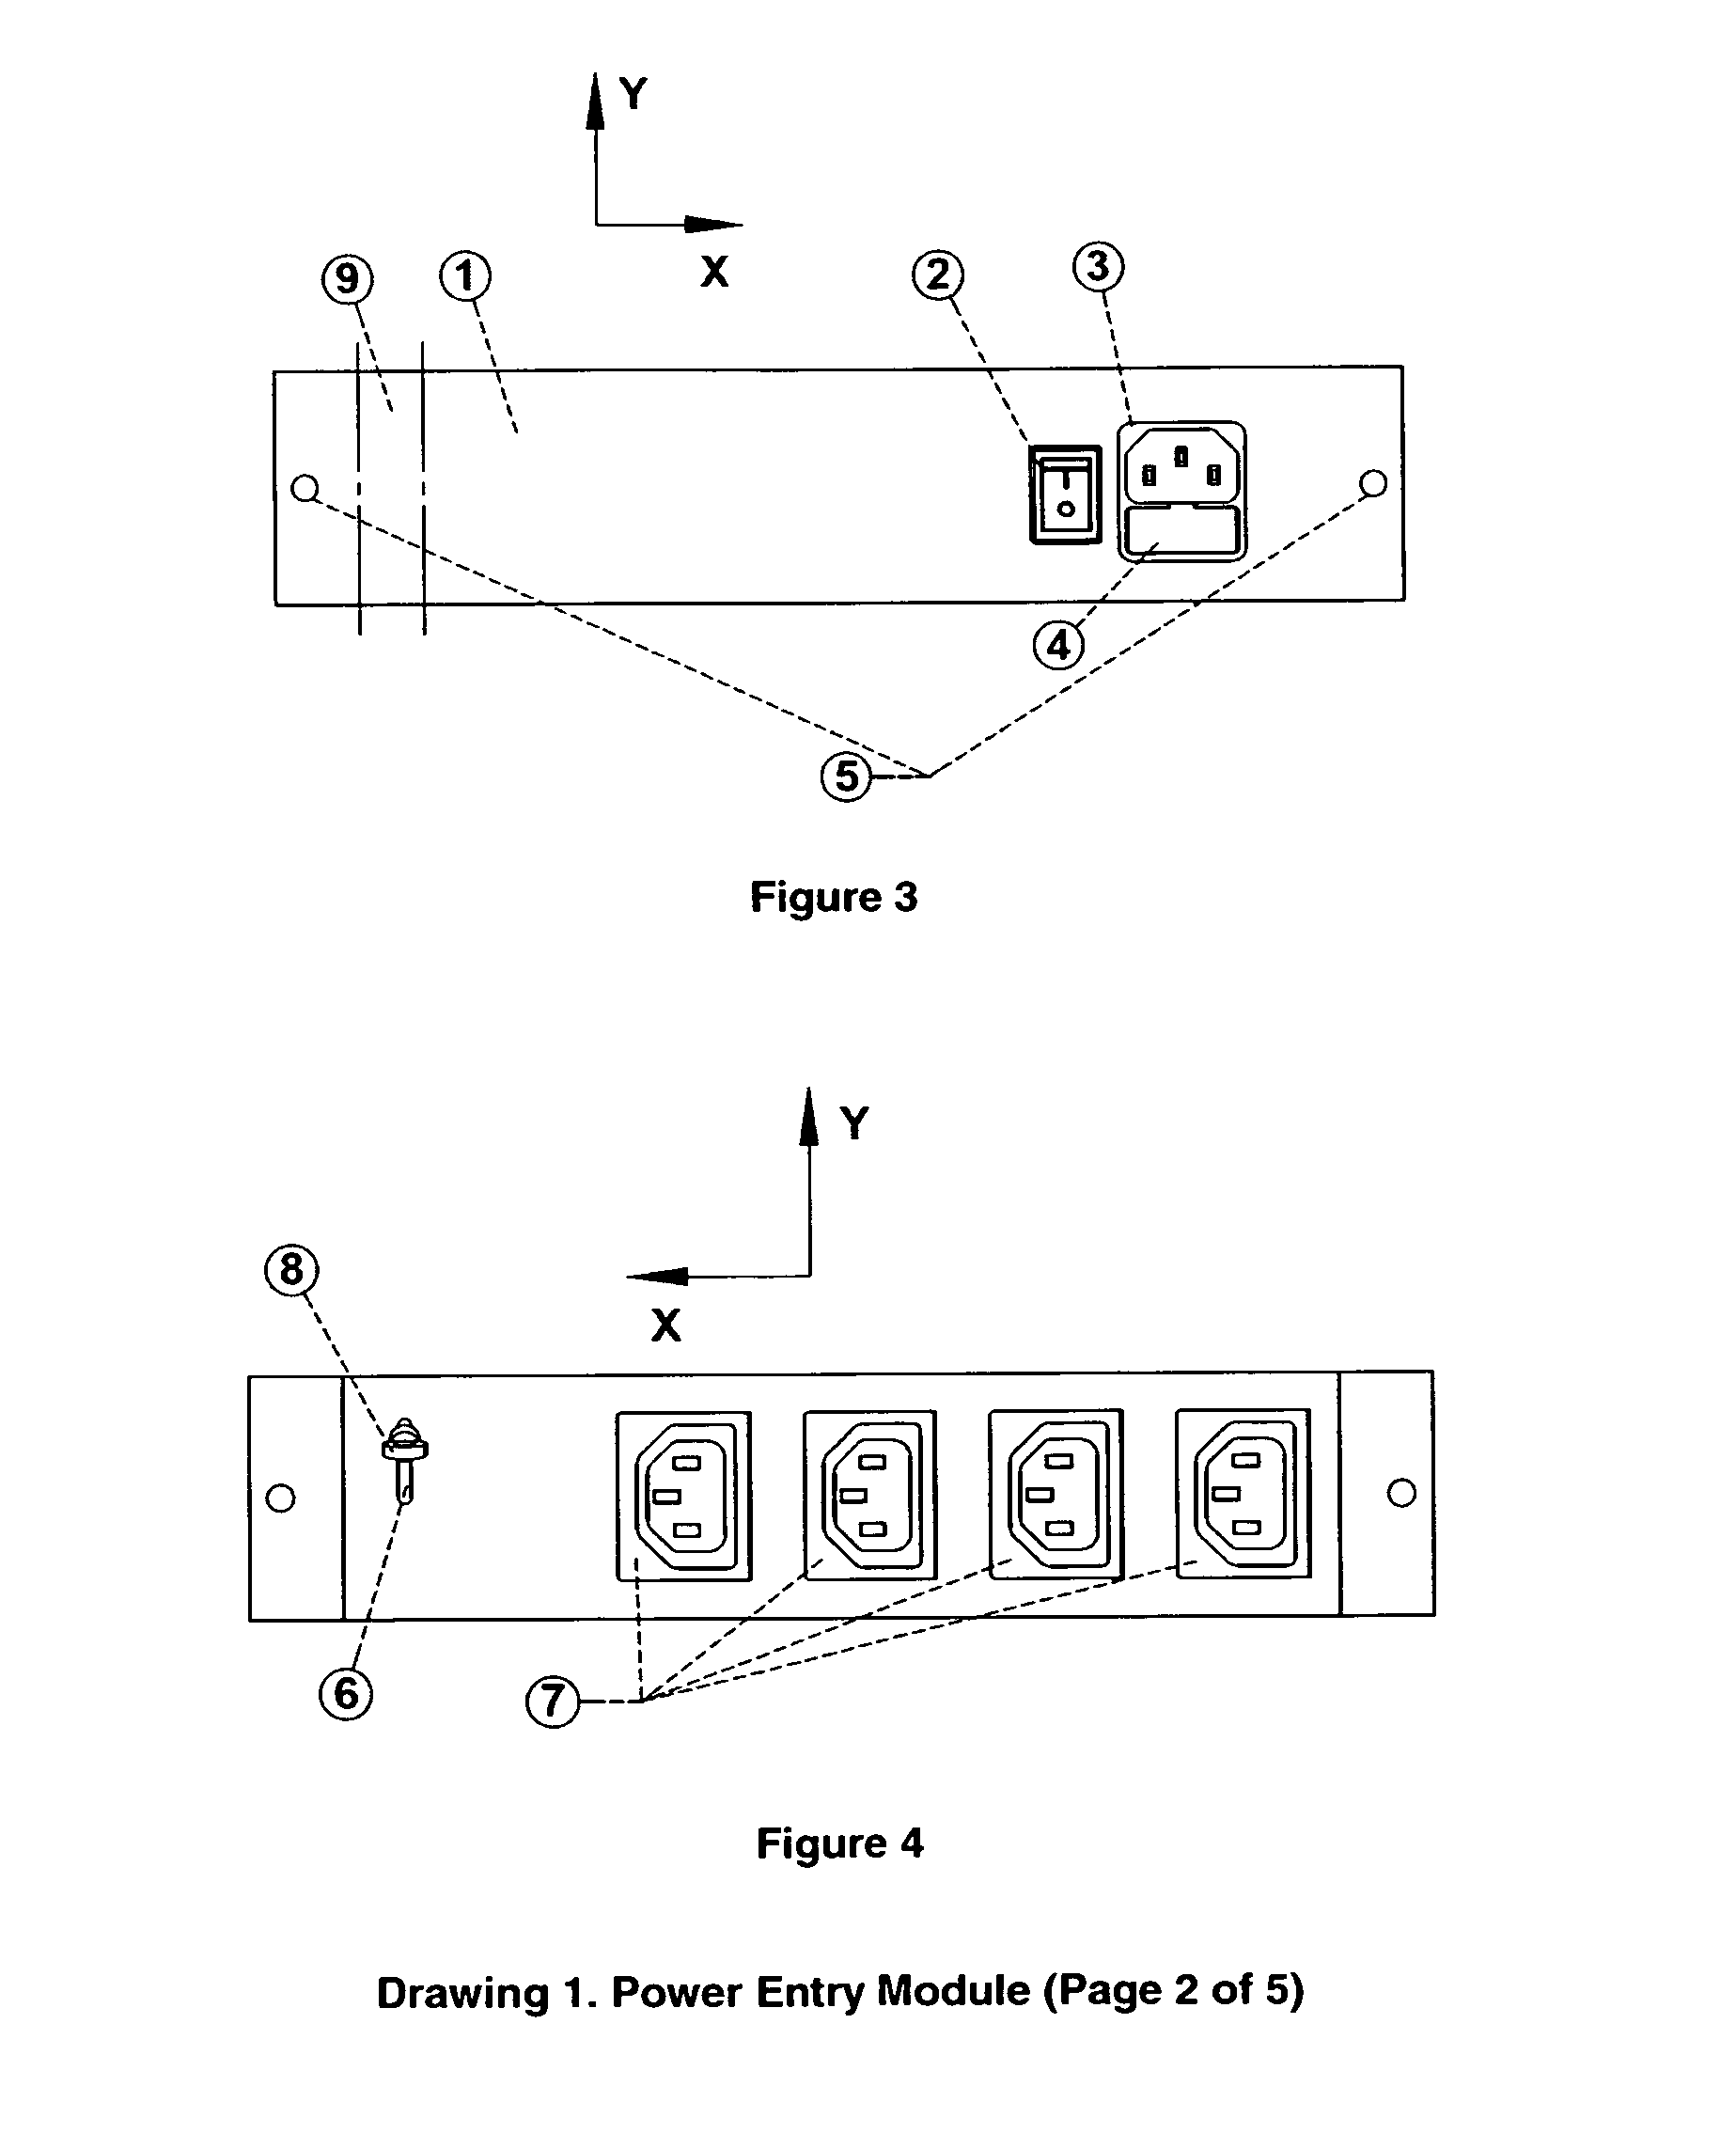 Modular power distribution and control system